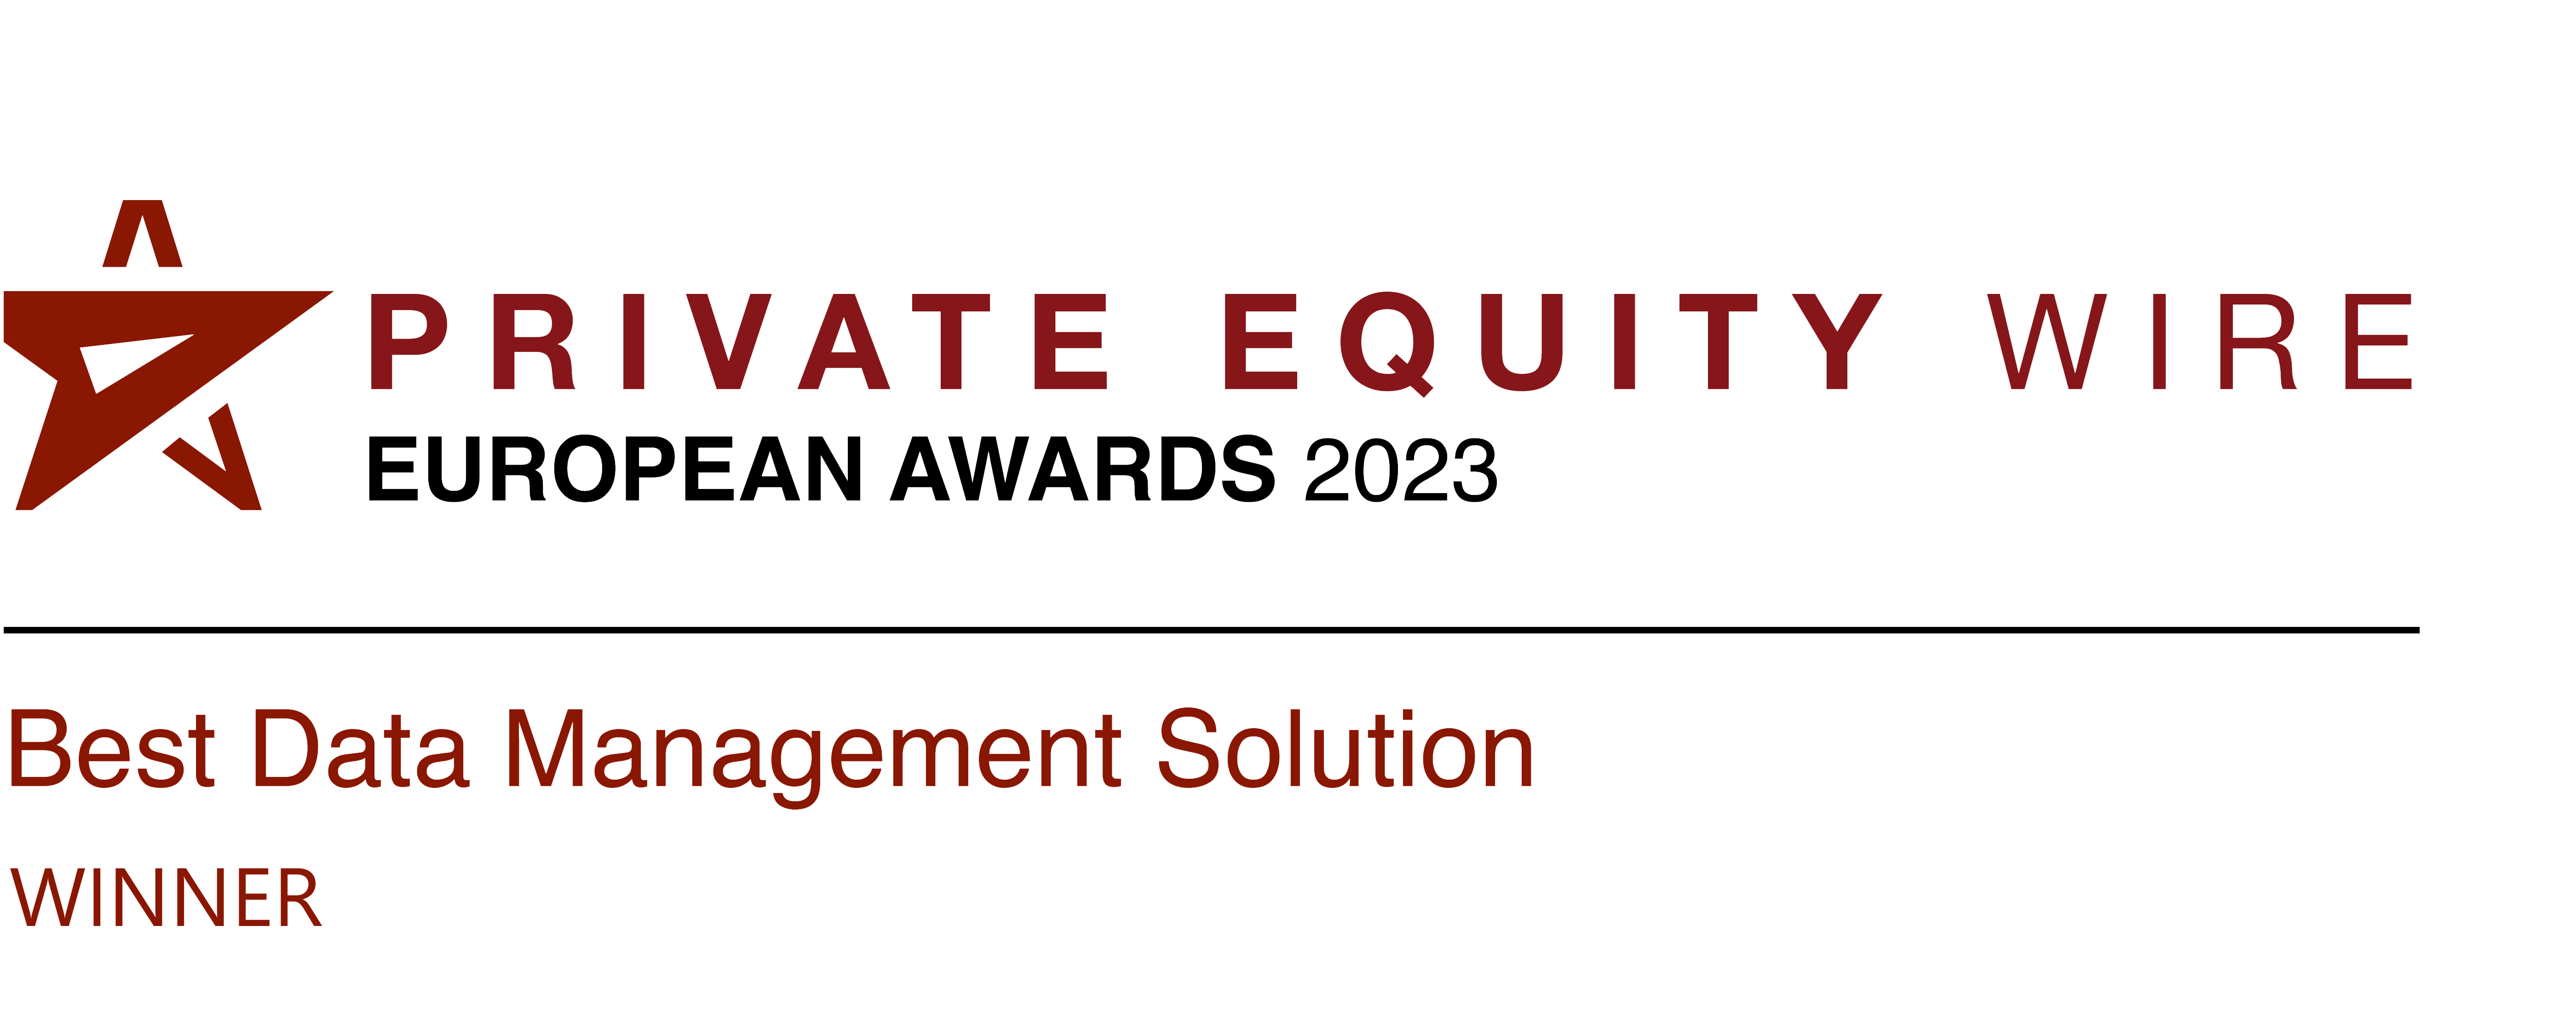 Quantium wins at the Private Equity Wire European Awards 2023 – Best Data Management Solution